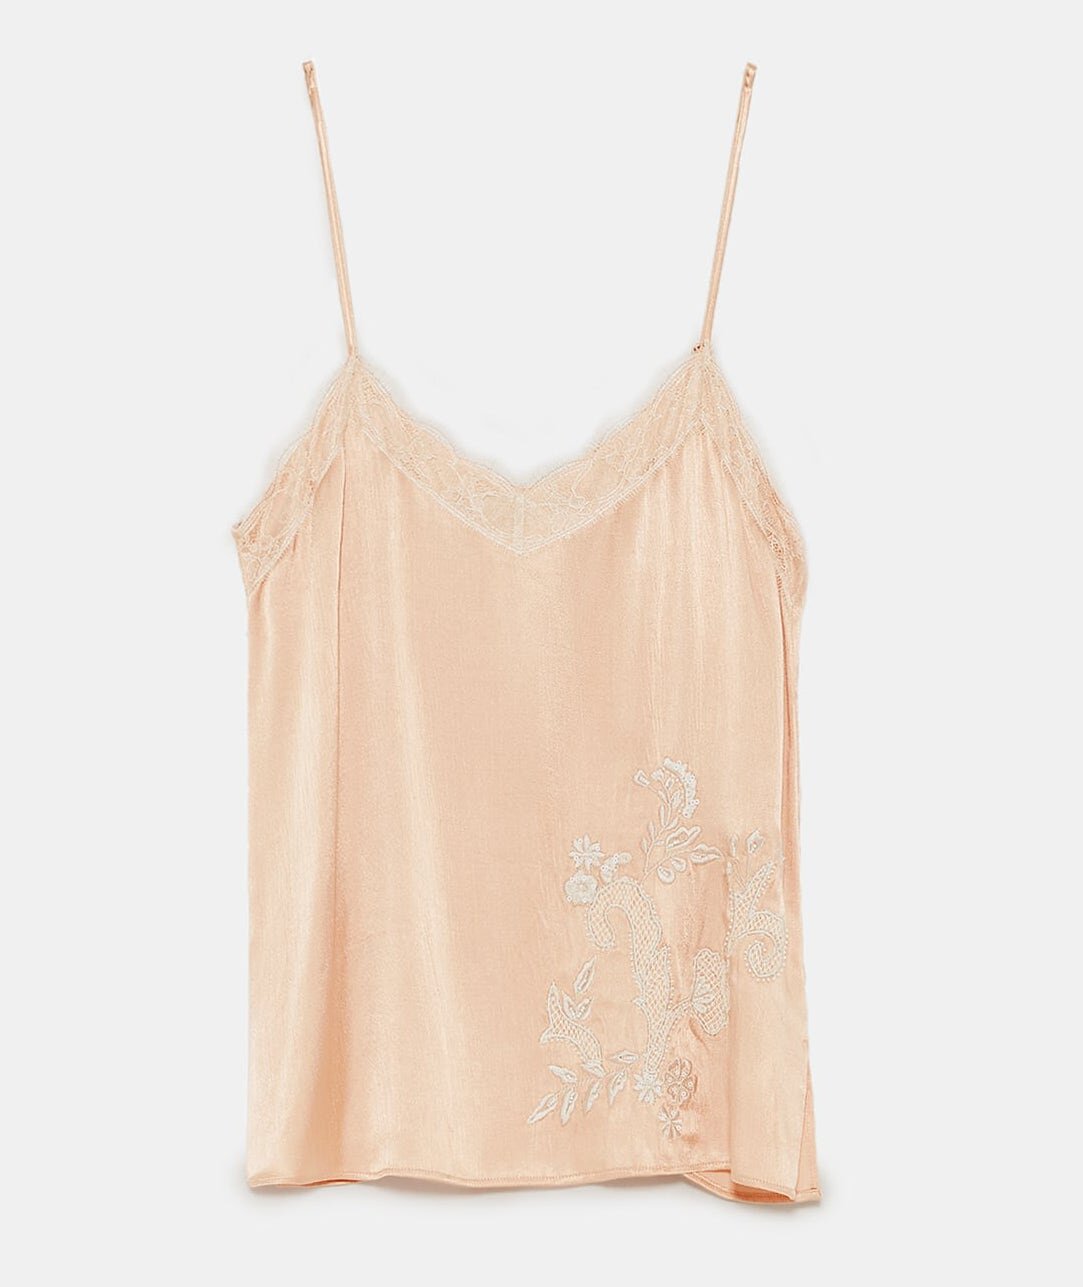 Zara Embroidered Camisole Top in Nude Pink — UFO No More